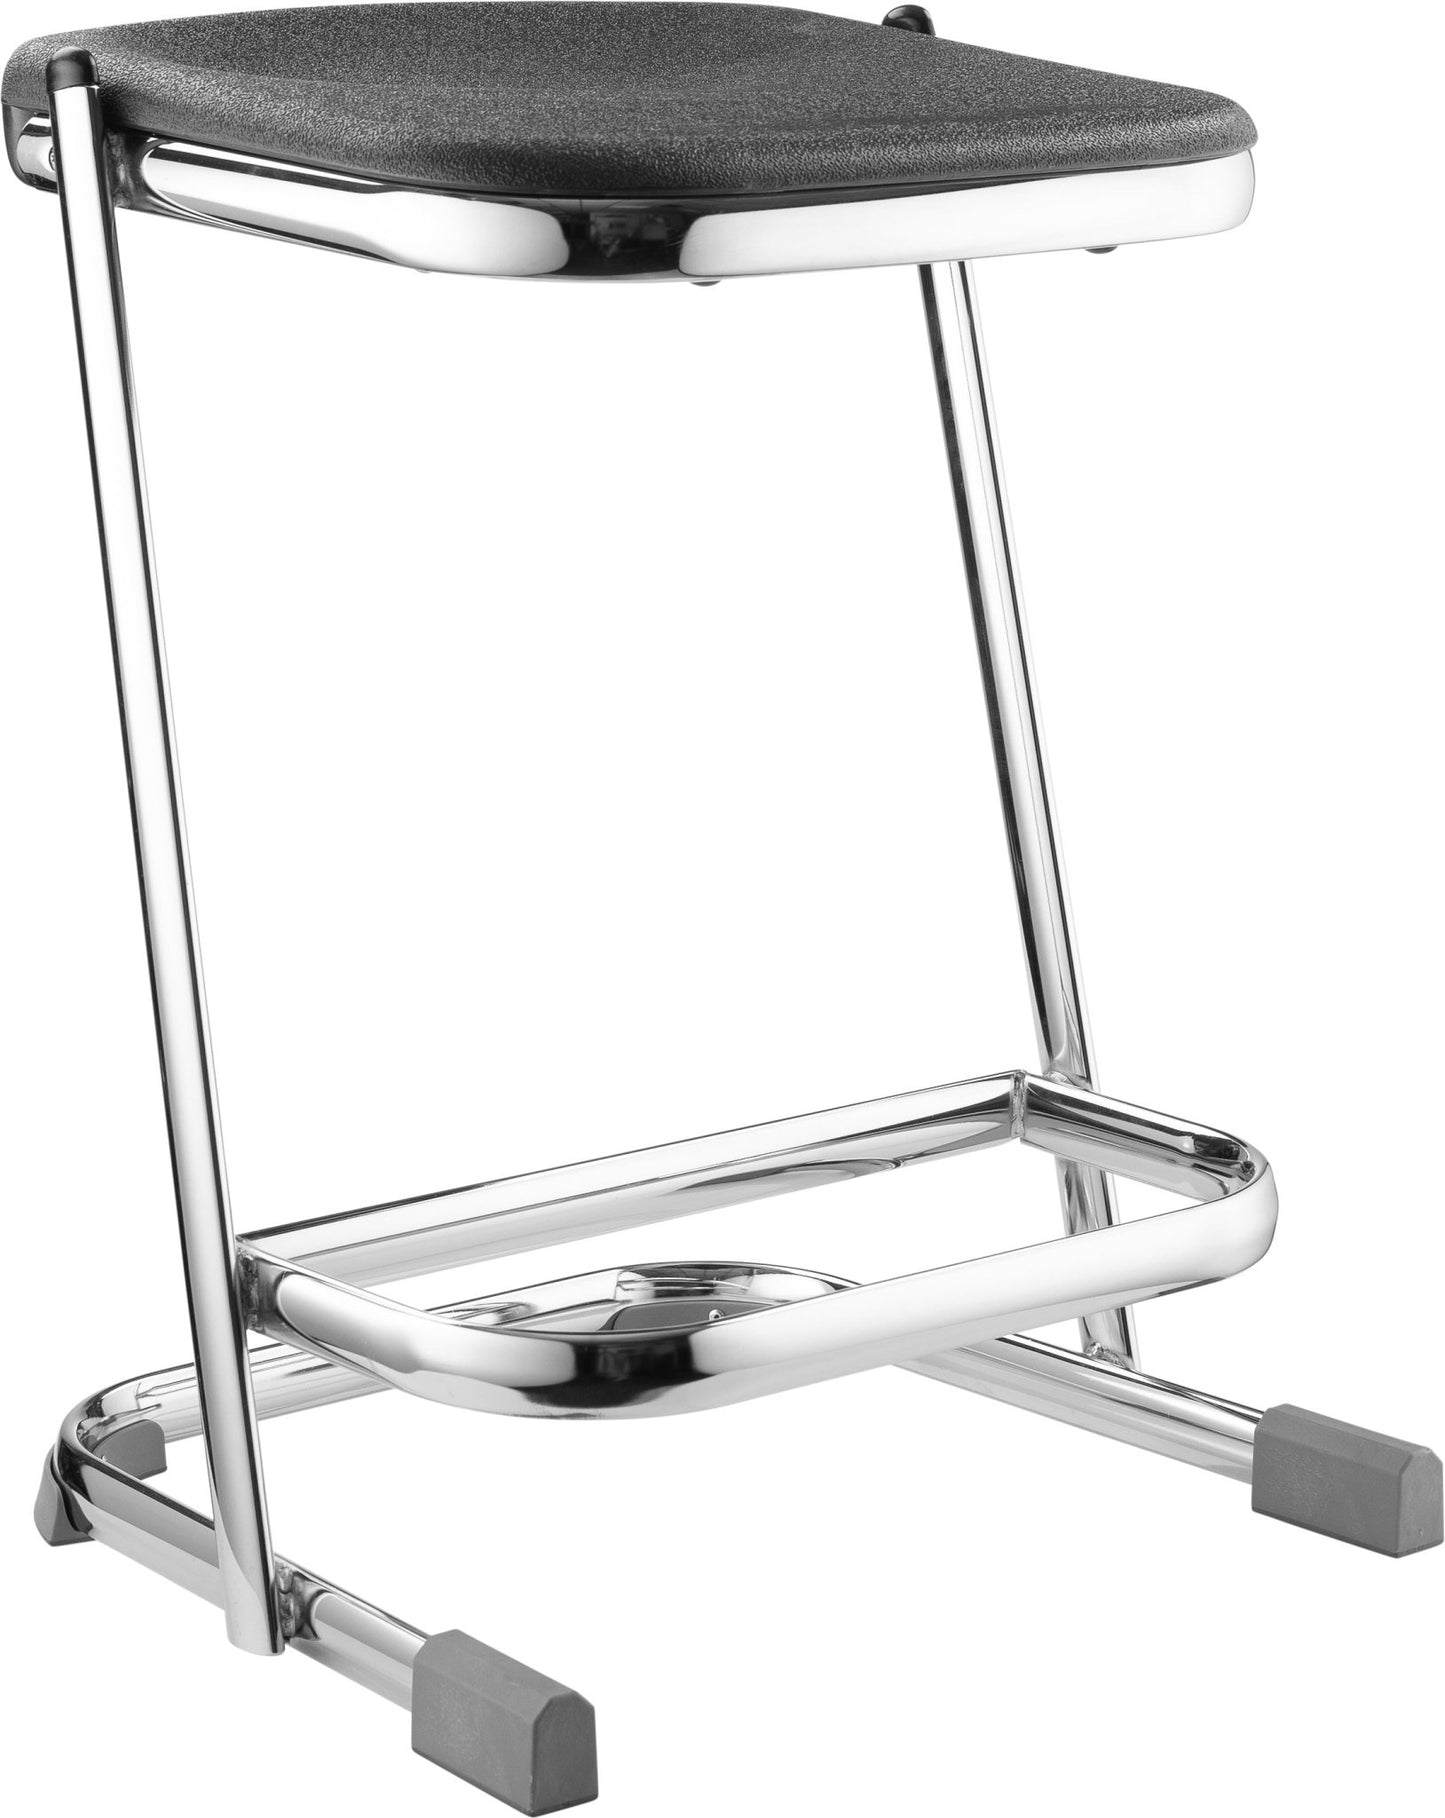 NPS Elephant Z-stool 22" H Stool with Blow Molded Seat (National Public Seating NPS-6622) - SchoolOutlet